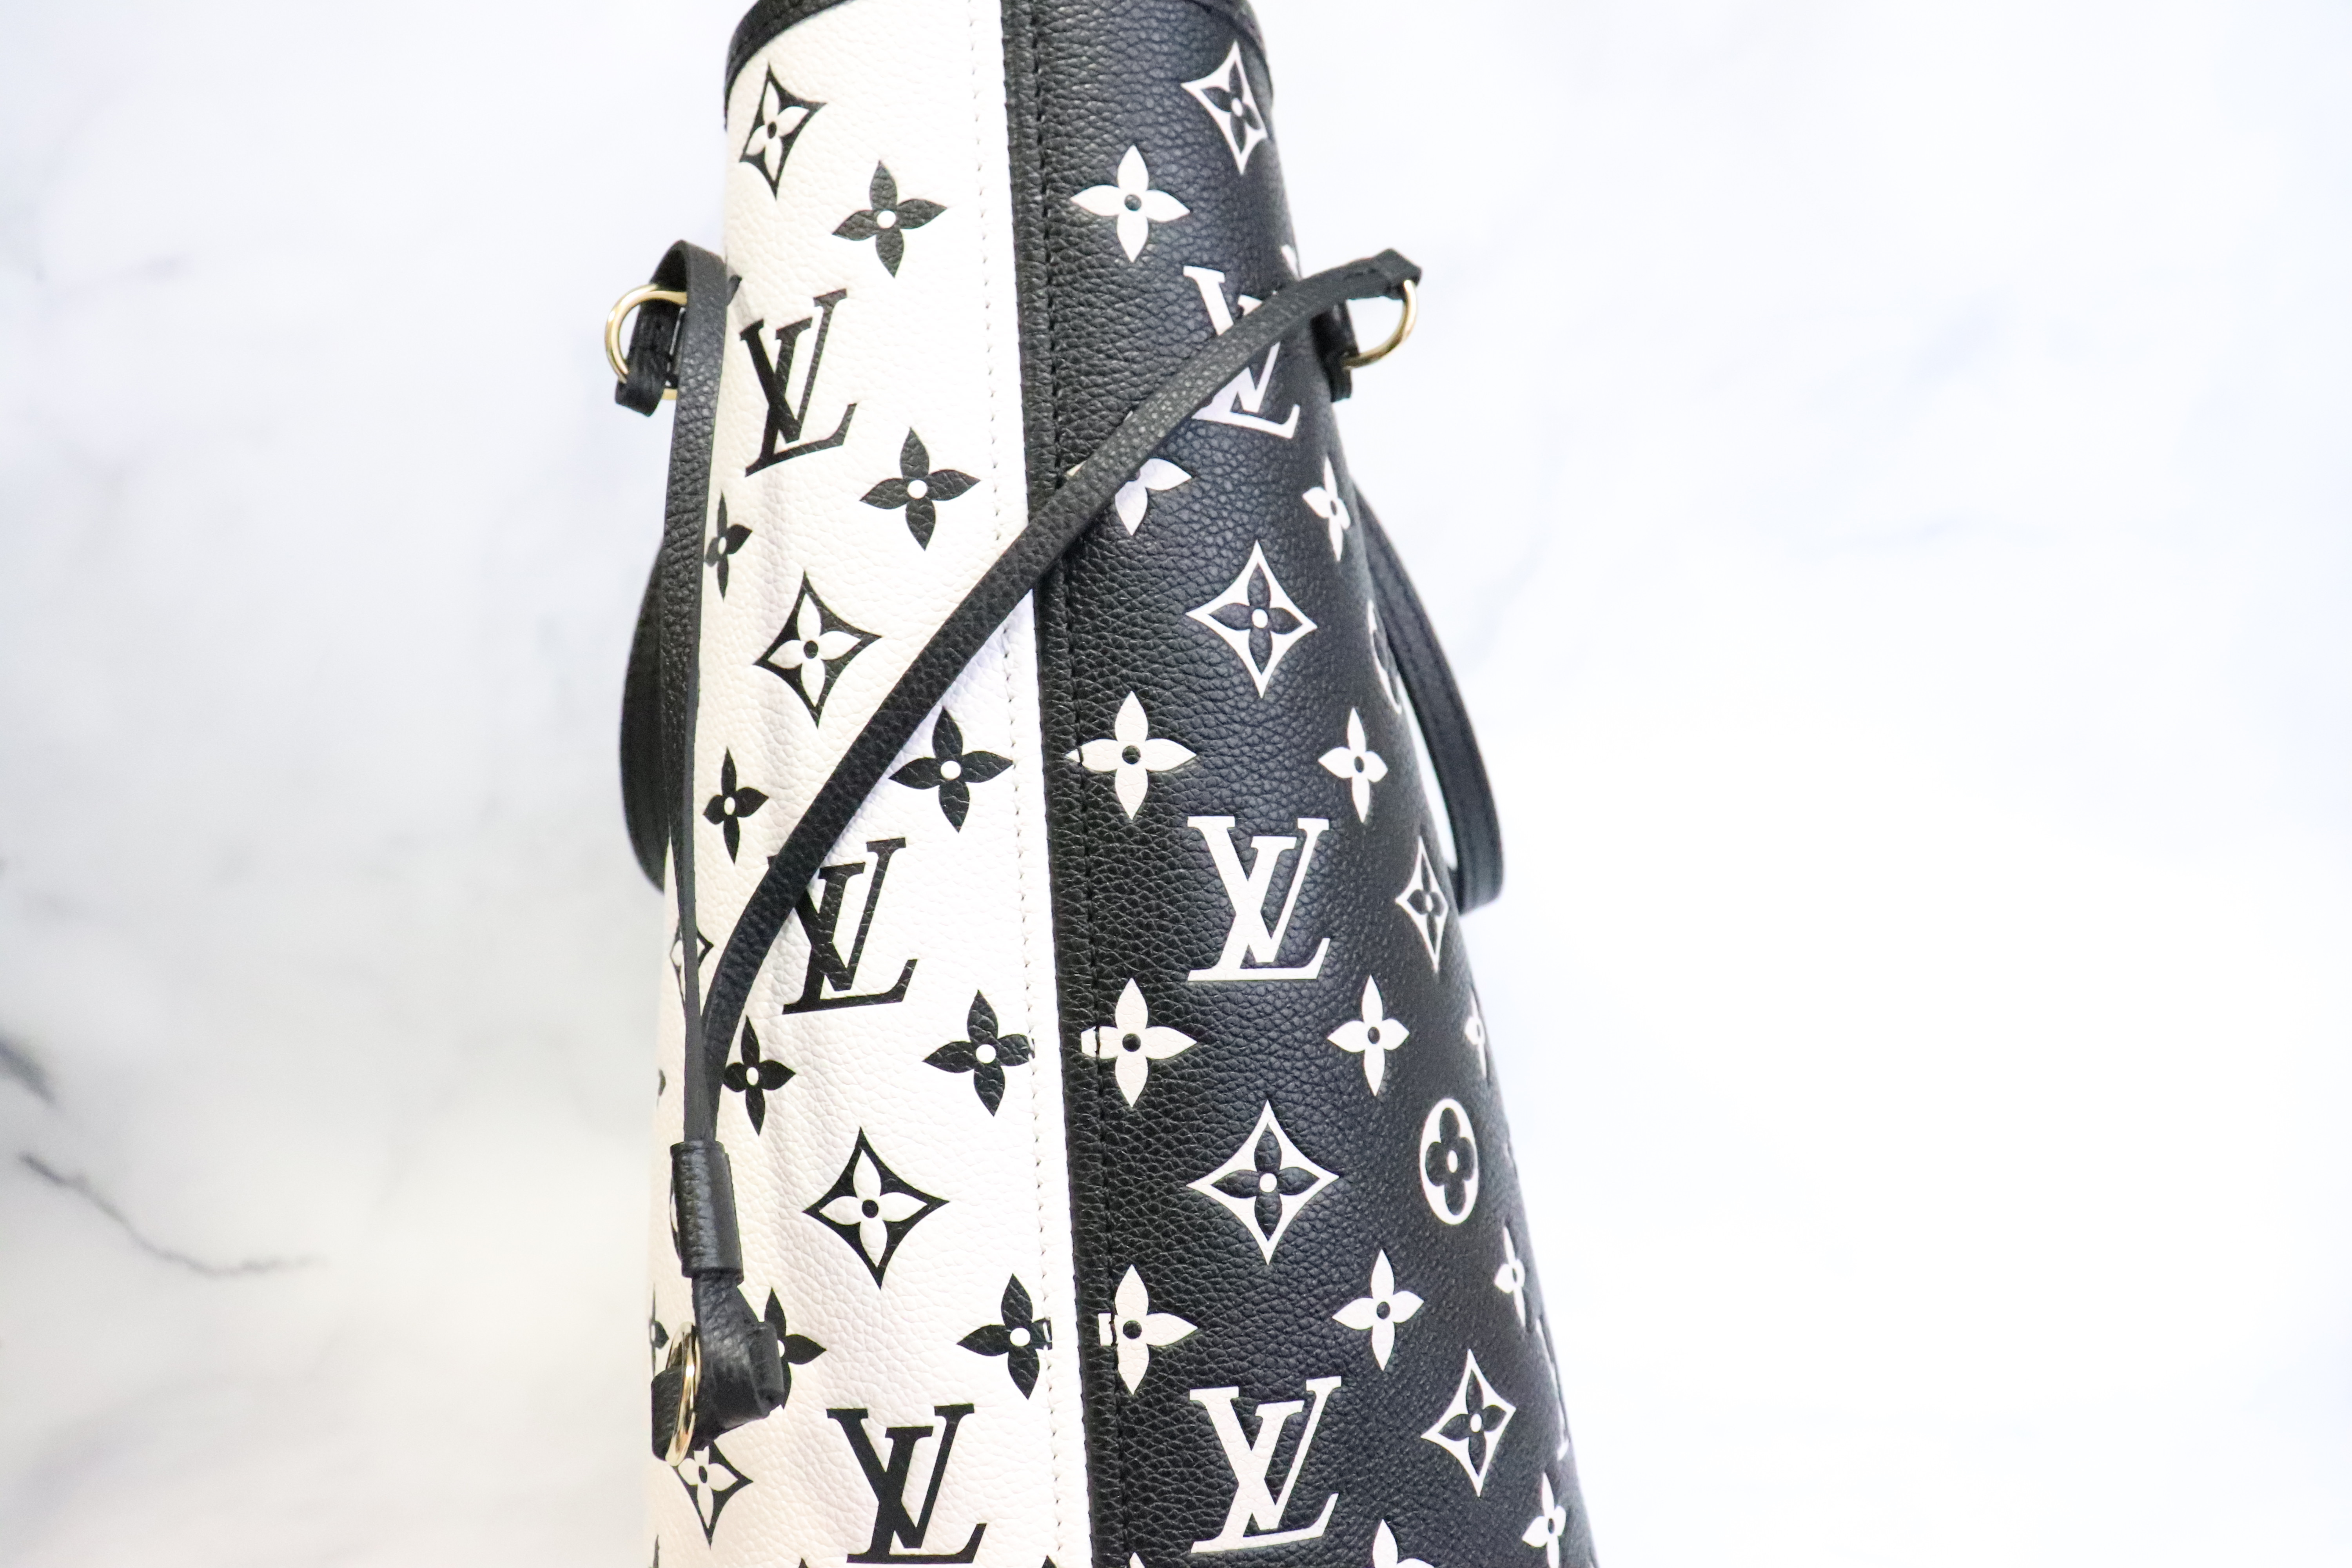 Louis Vuitton Black x Pink Monogram Fall for You Neverfull MM Tote 63lz718s